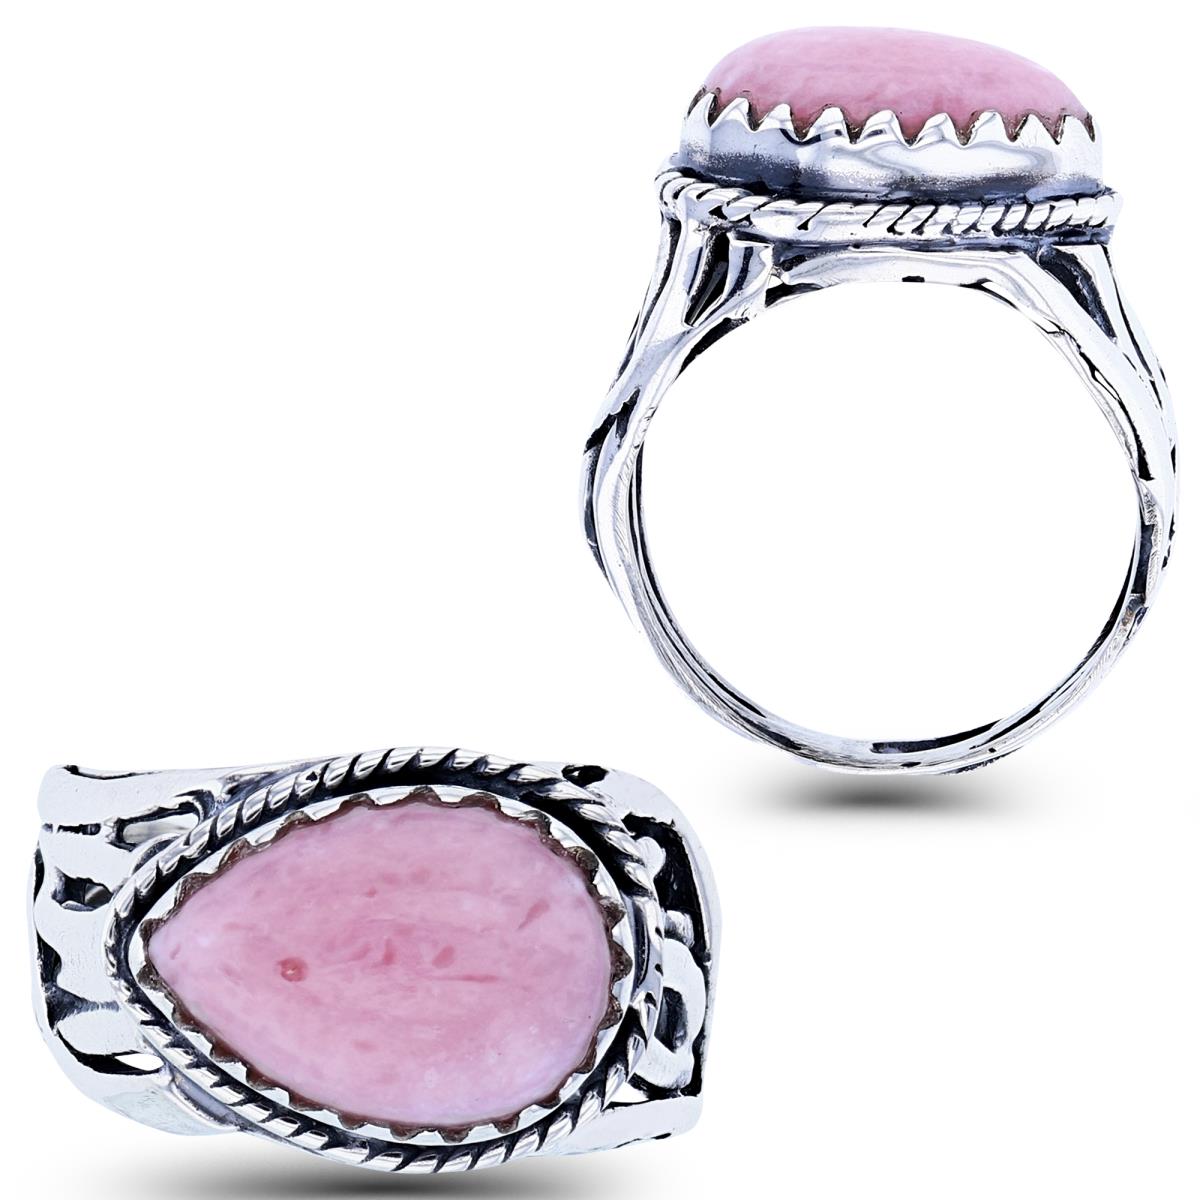 Sterling Silver Oxidized Textured 14x10mm PS Cabochon Pink Opal Ring